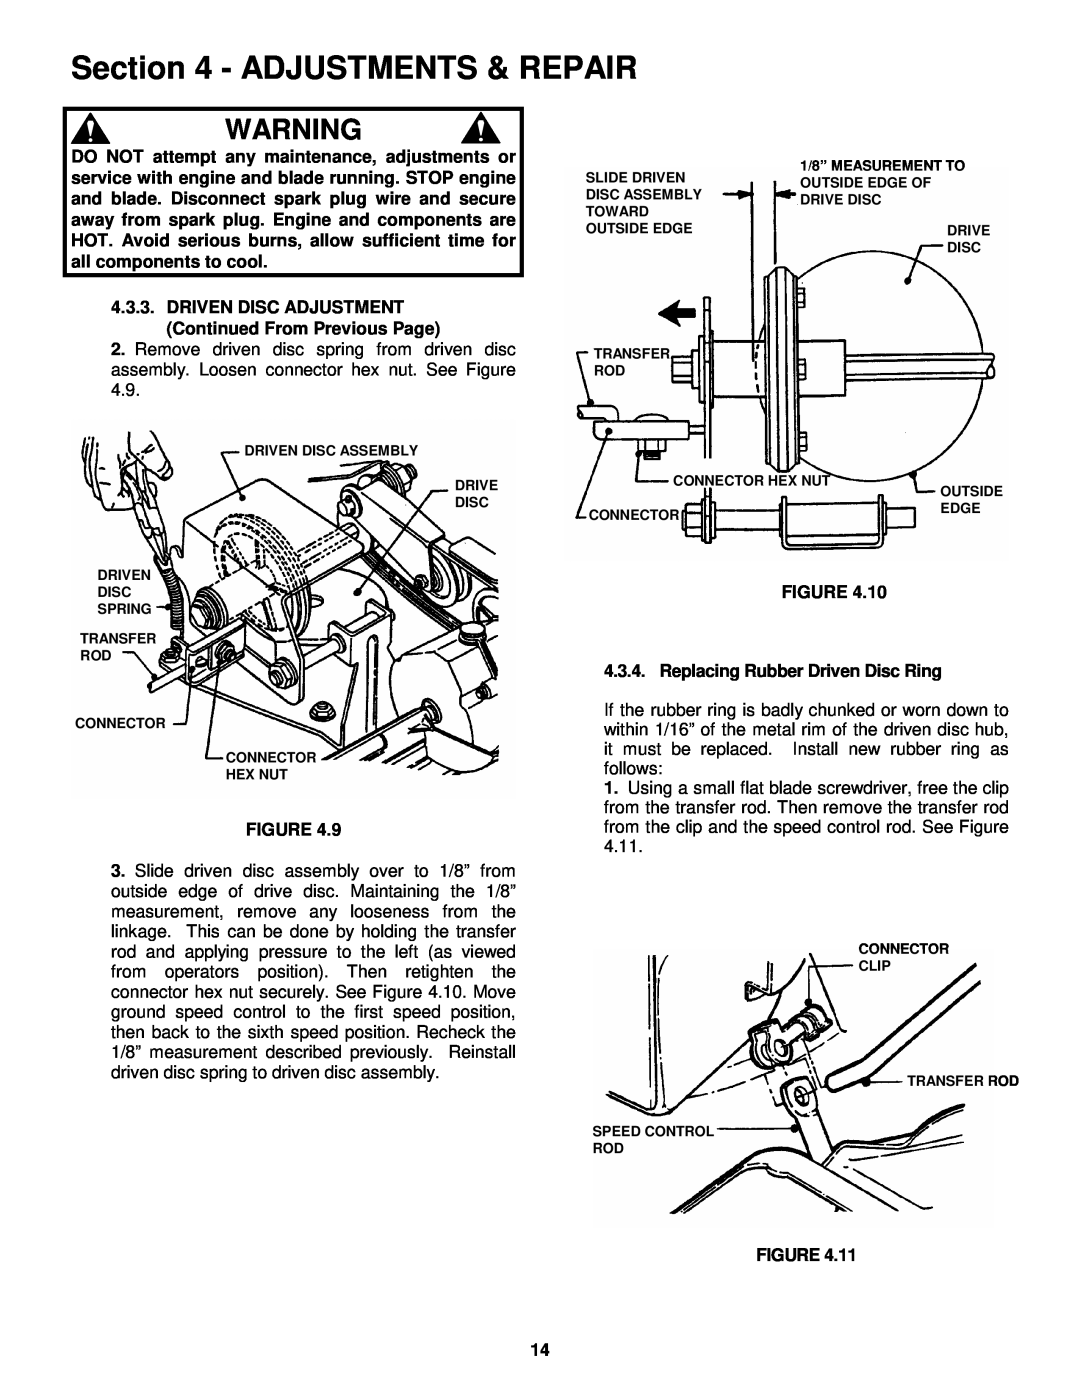 Snapper MRP216015B important safety instructions Adjustments & Repair, 3.4. Replacing Rubber Driven Disc Ring 